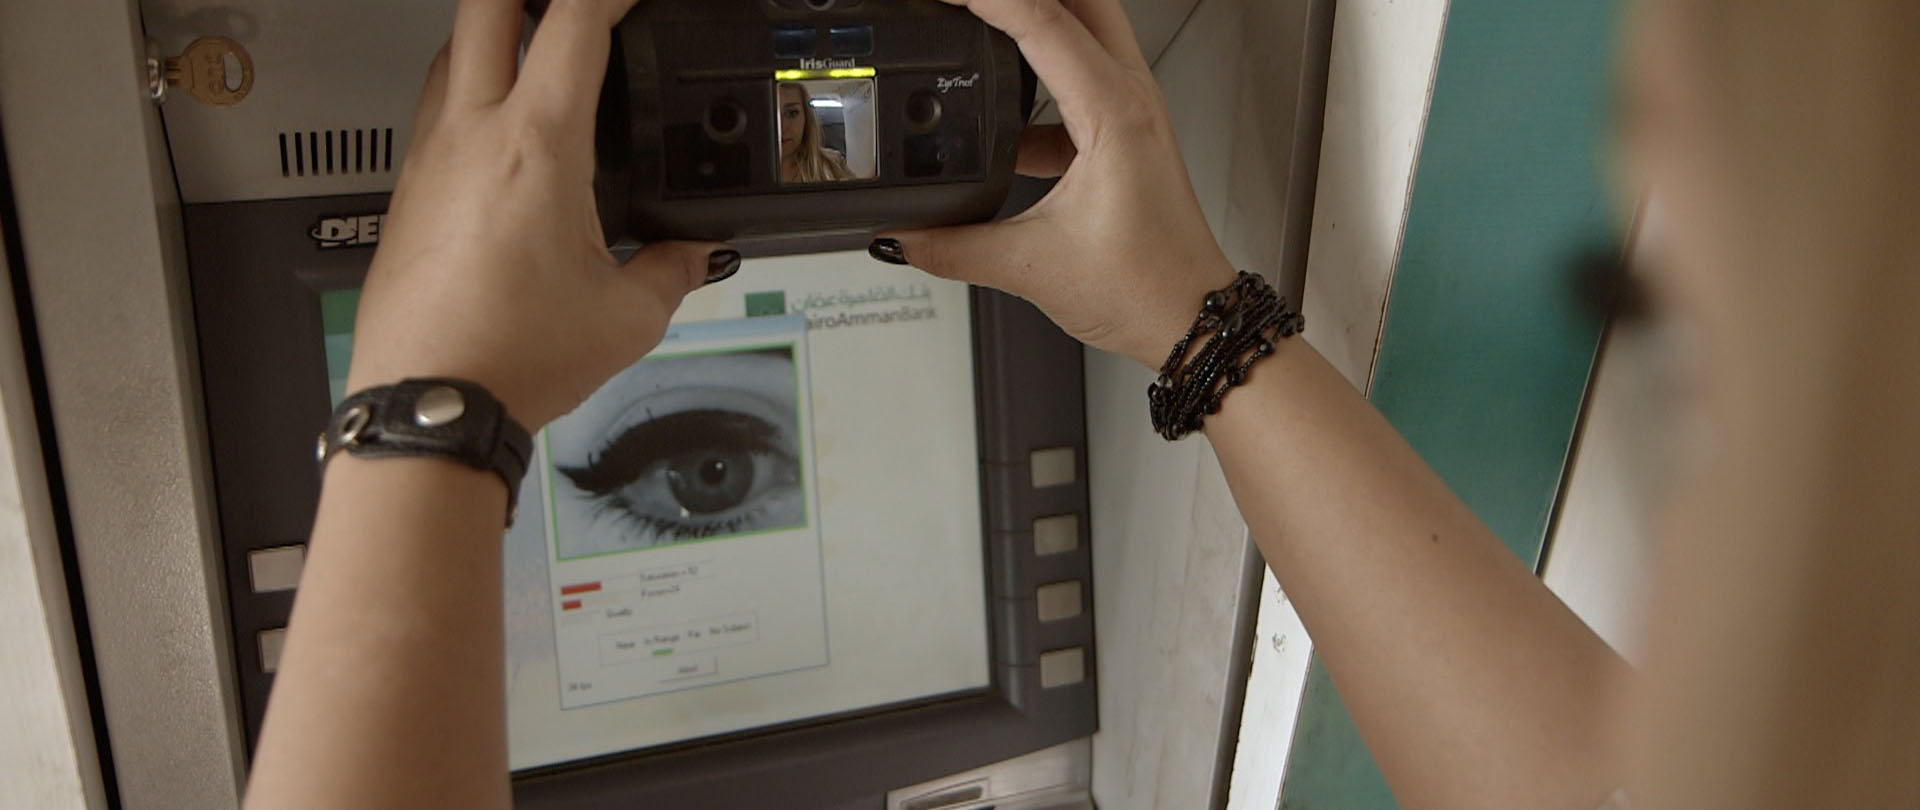 Iris scanning biometrics allow refugees in camps to safely retrieve cash disbursements from automatic tellers.